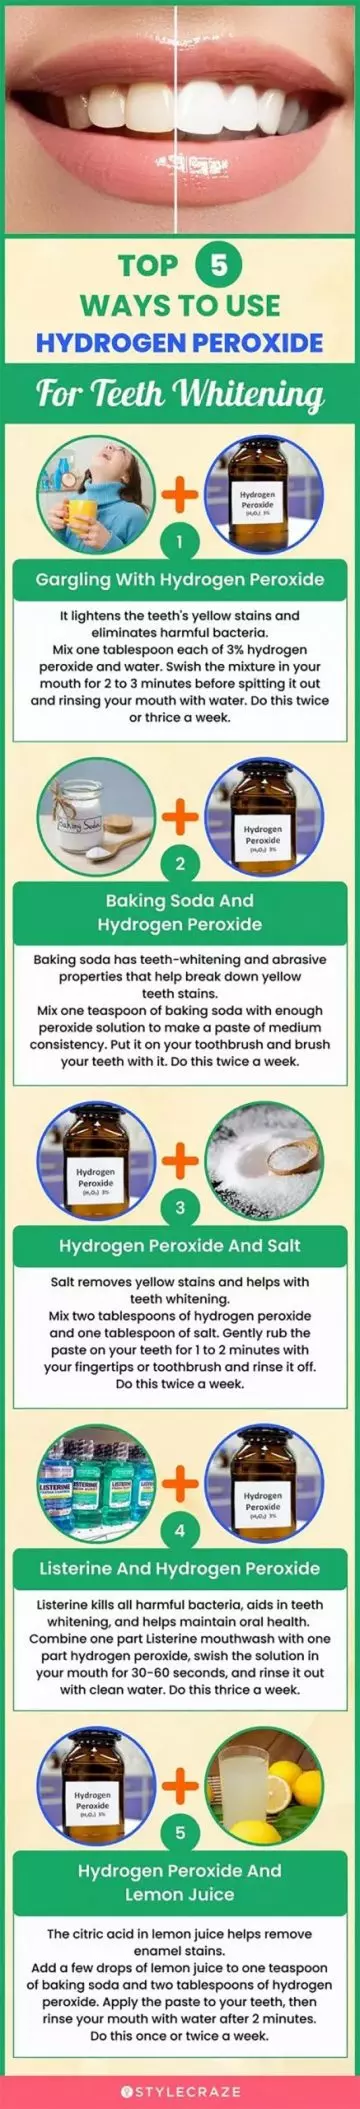 top 5 ways to use hydrogen peroxide for teeth whitening (infographic)